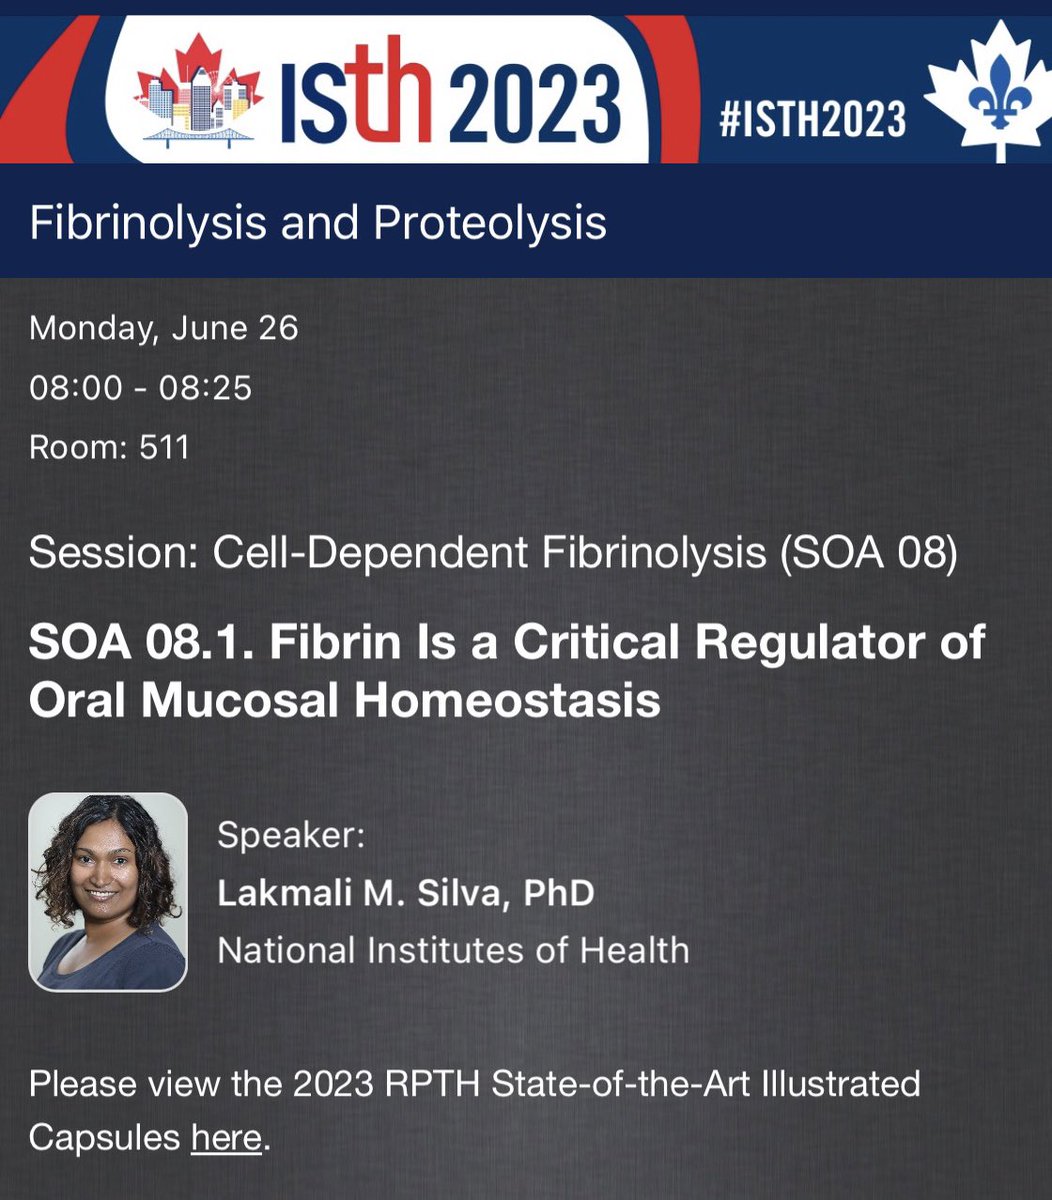 Excited to share my work tomorrow (Monday) at 8 am in room 511. #ISTH2023